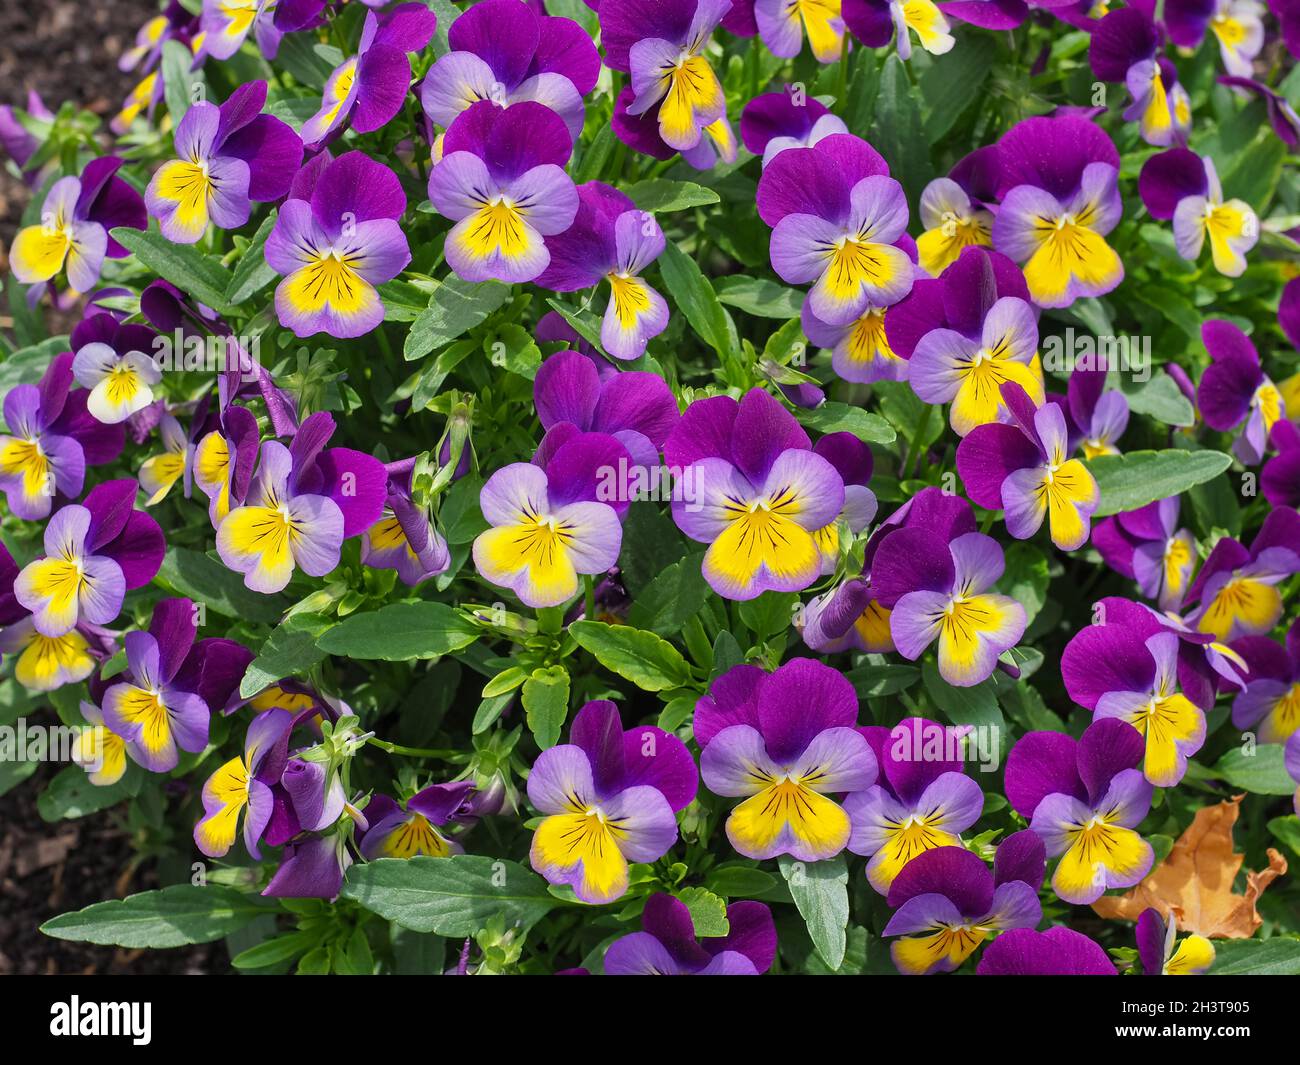 Fresh Viola tricolor flower bed or small Heartsease plant. Violet and purple with yellow center Johnny Jump up flower. Floral textured surface pattern Stock Photo